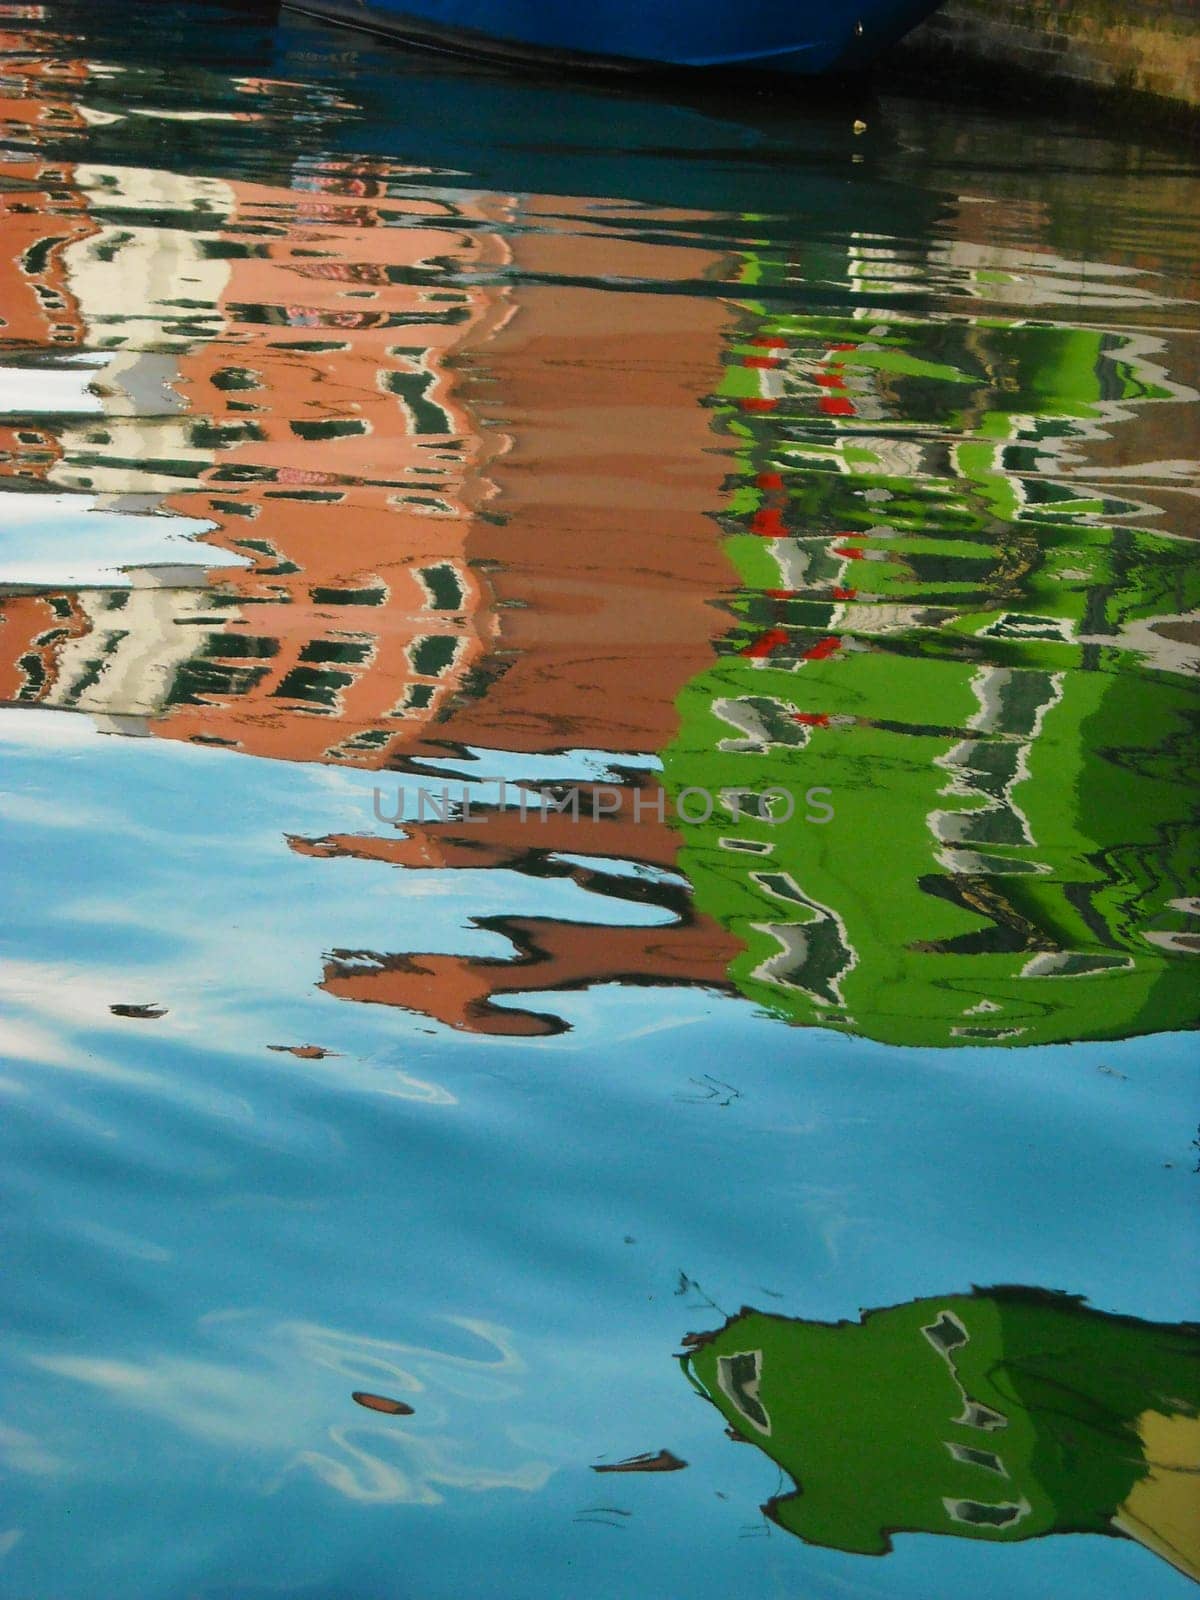 Burano abstract by Giamplume